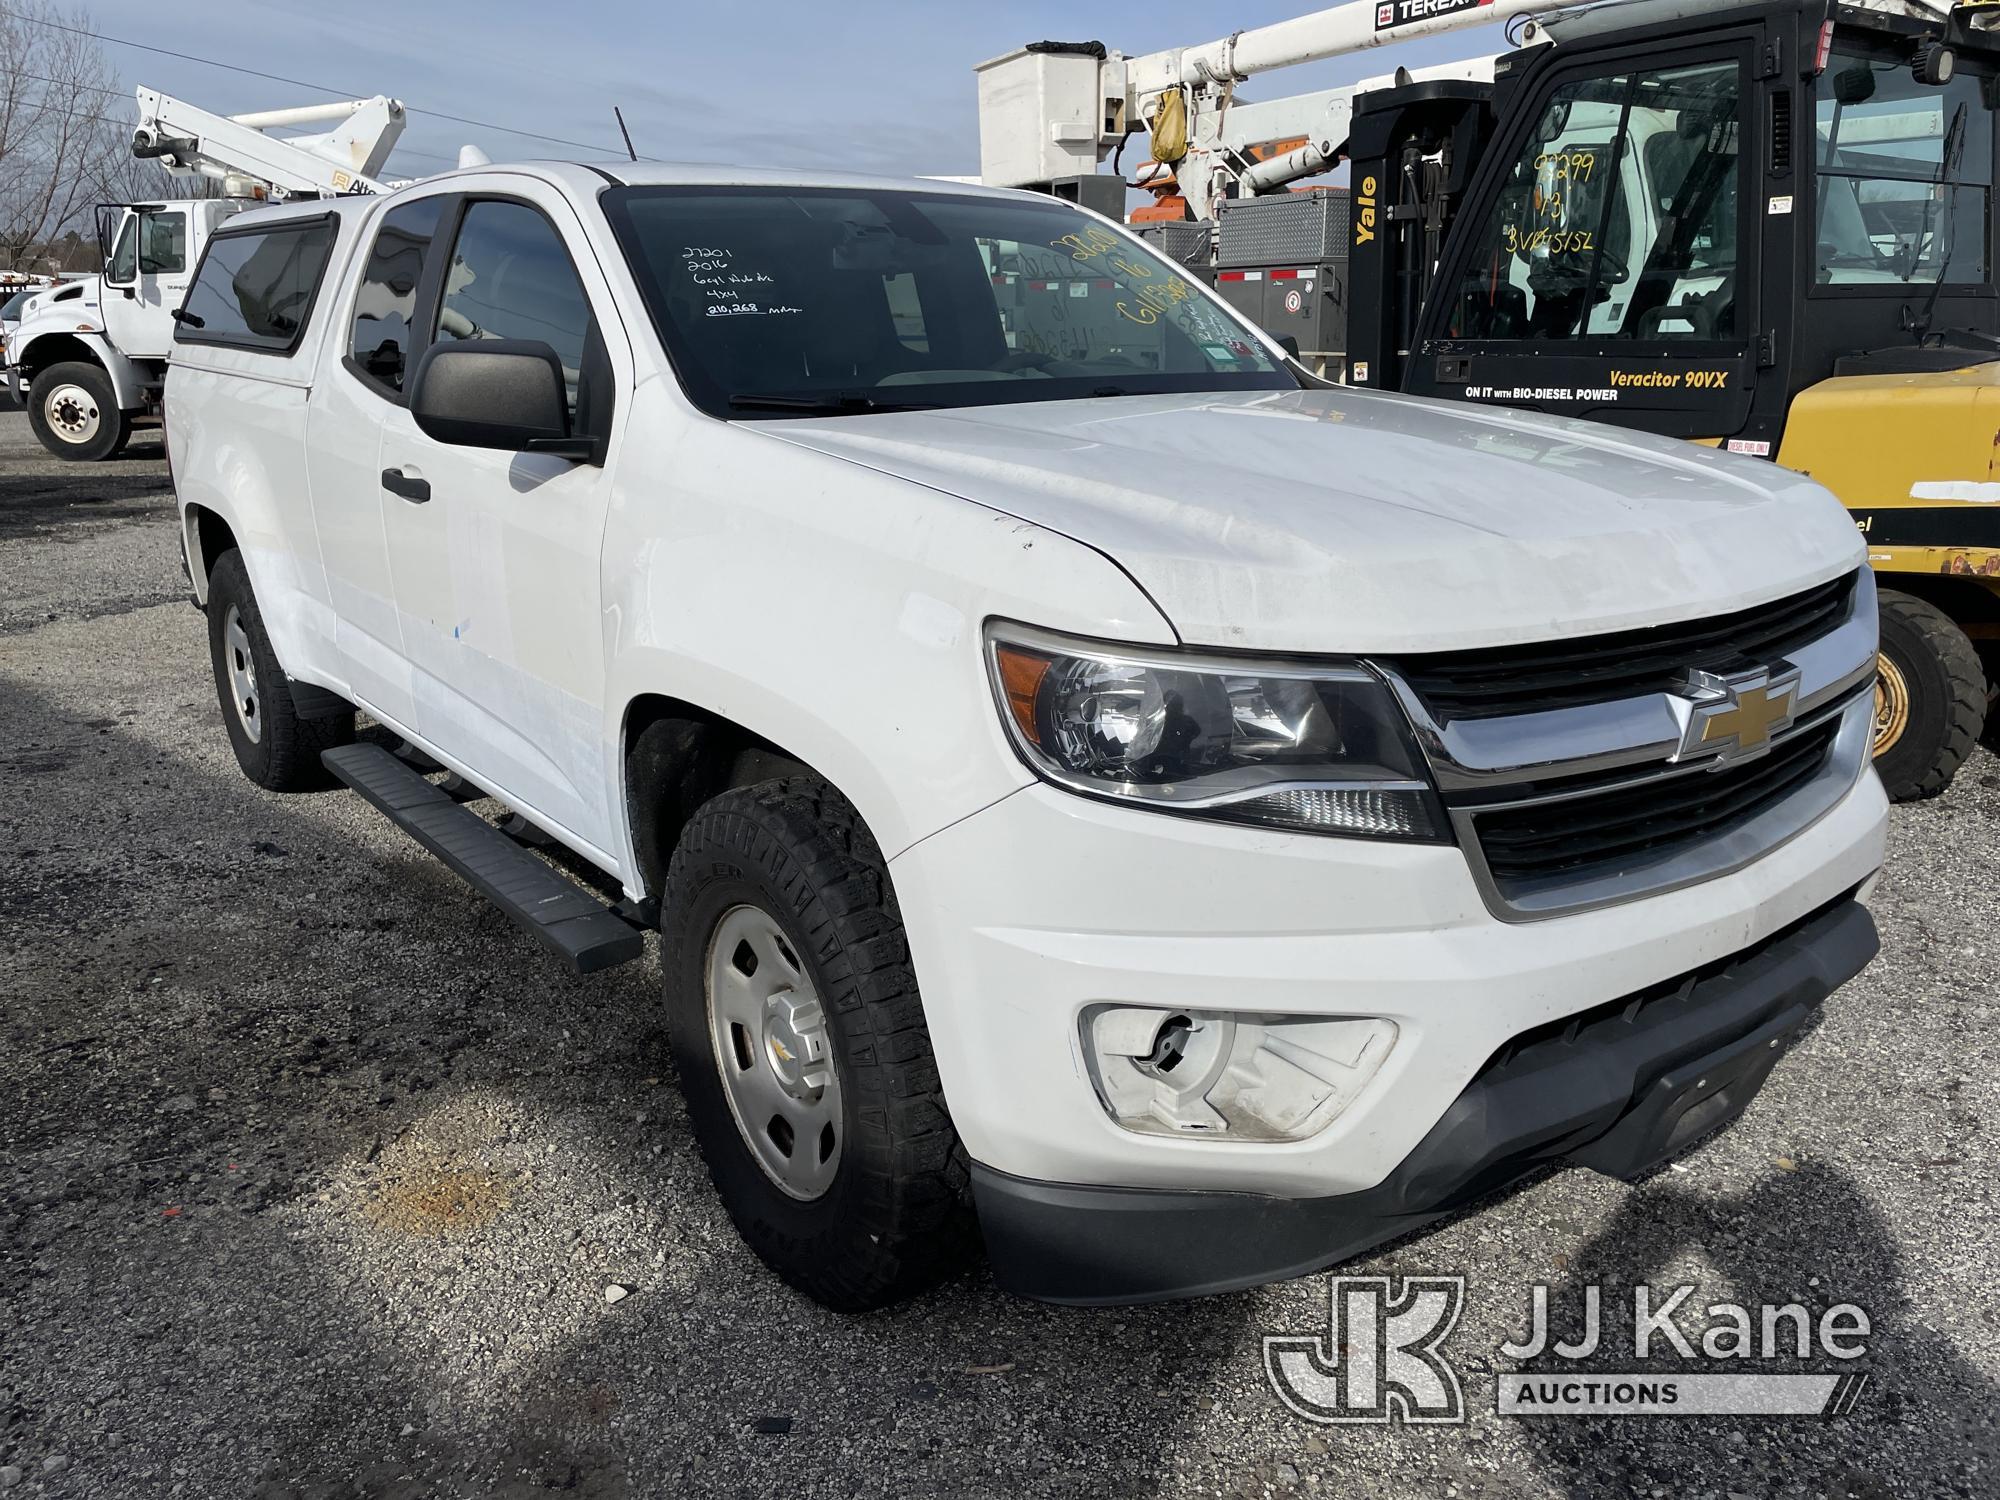 (Plymouth Meeting, PA) 2016 Chevrolet Colorado 4x4 Extended-Cab Pickup Truck Runs Rough & Moves, Bod